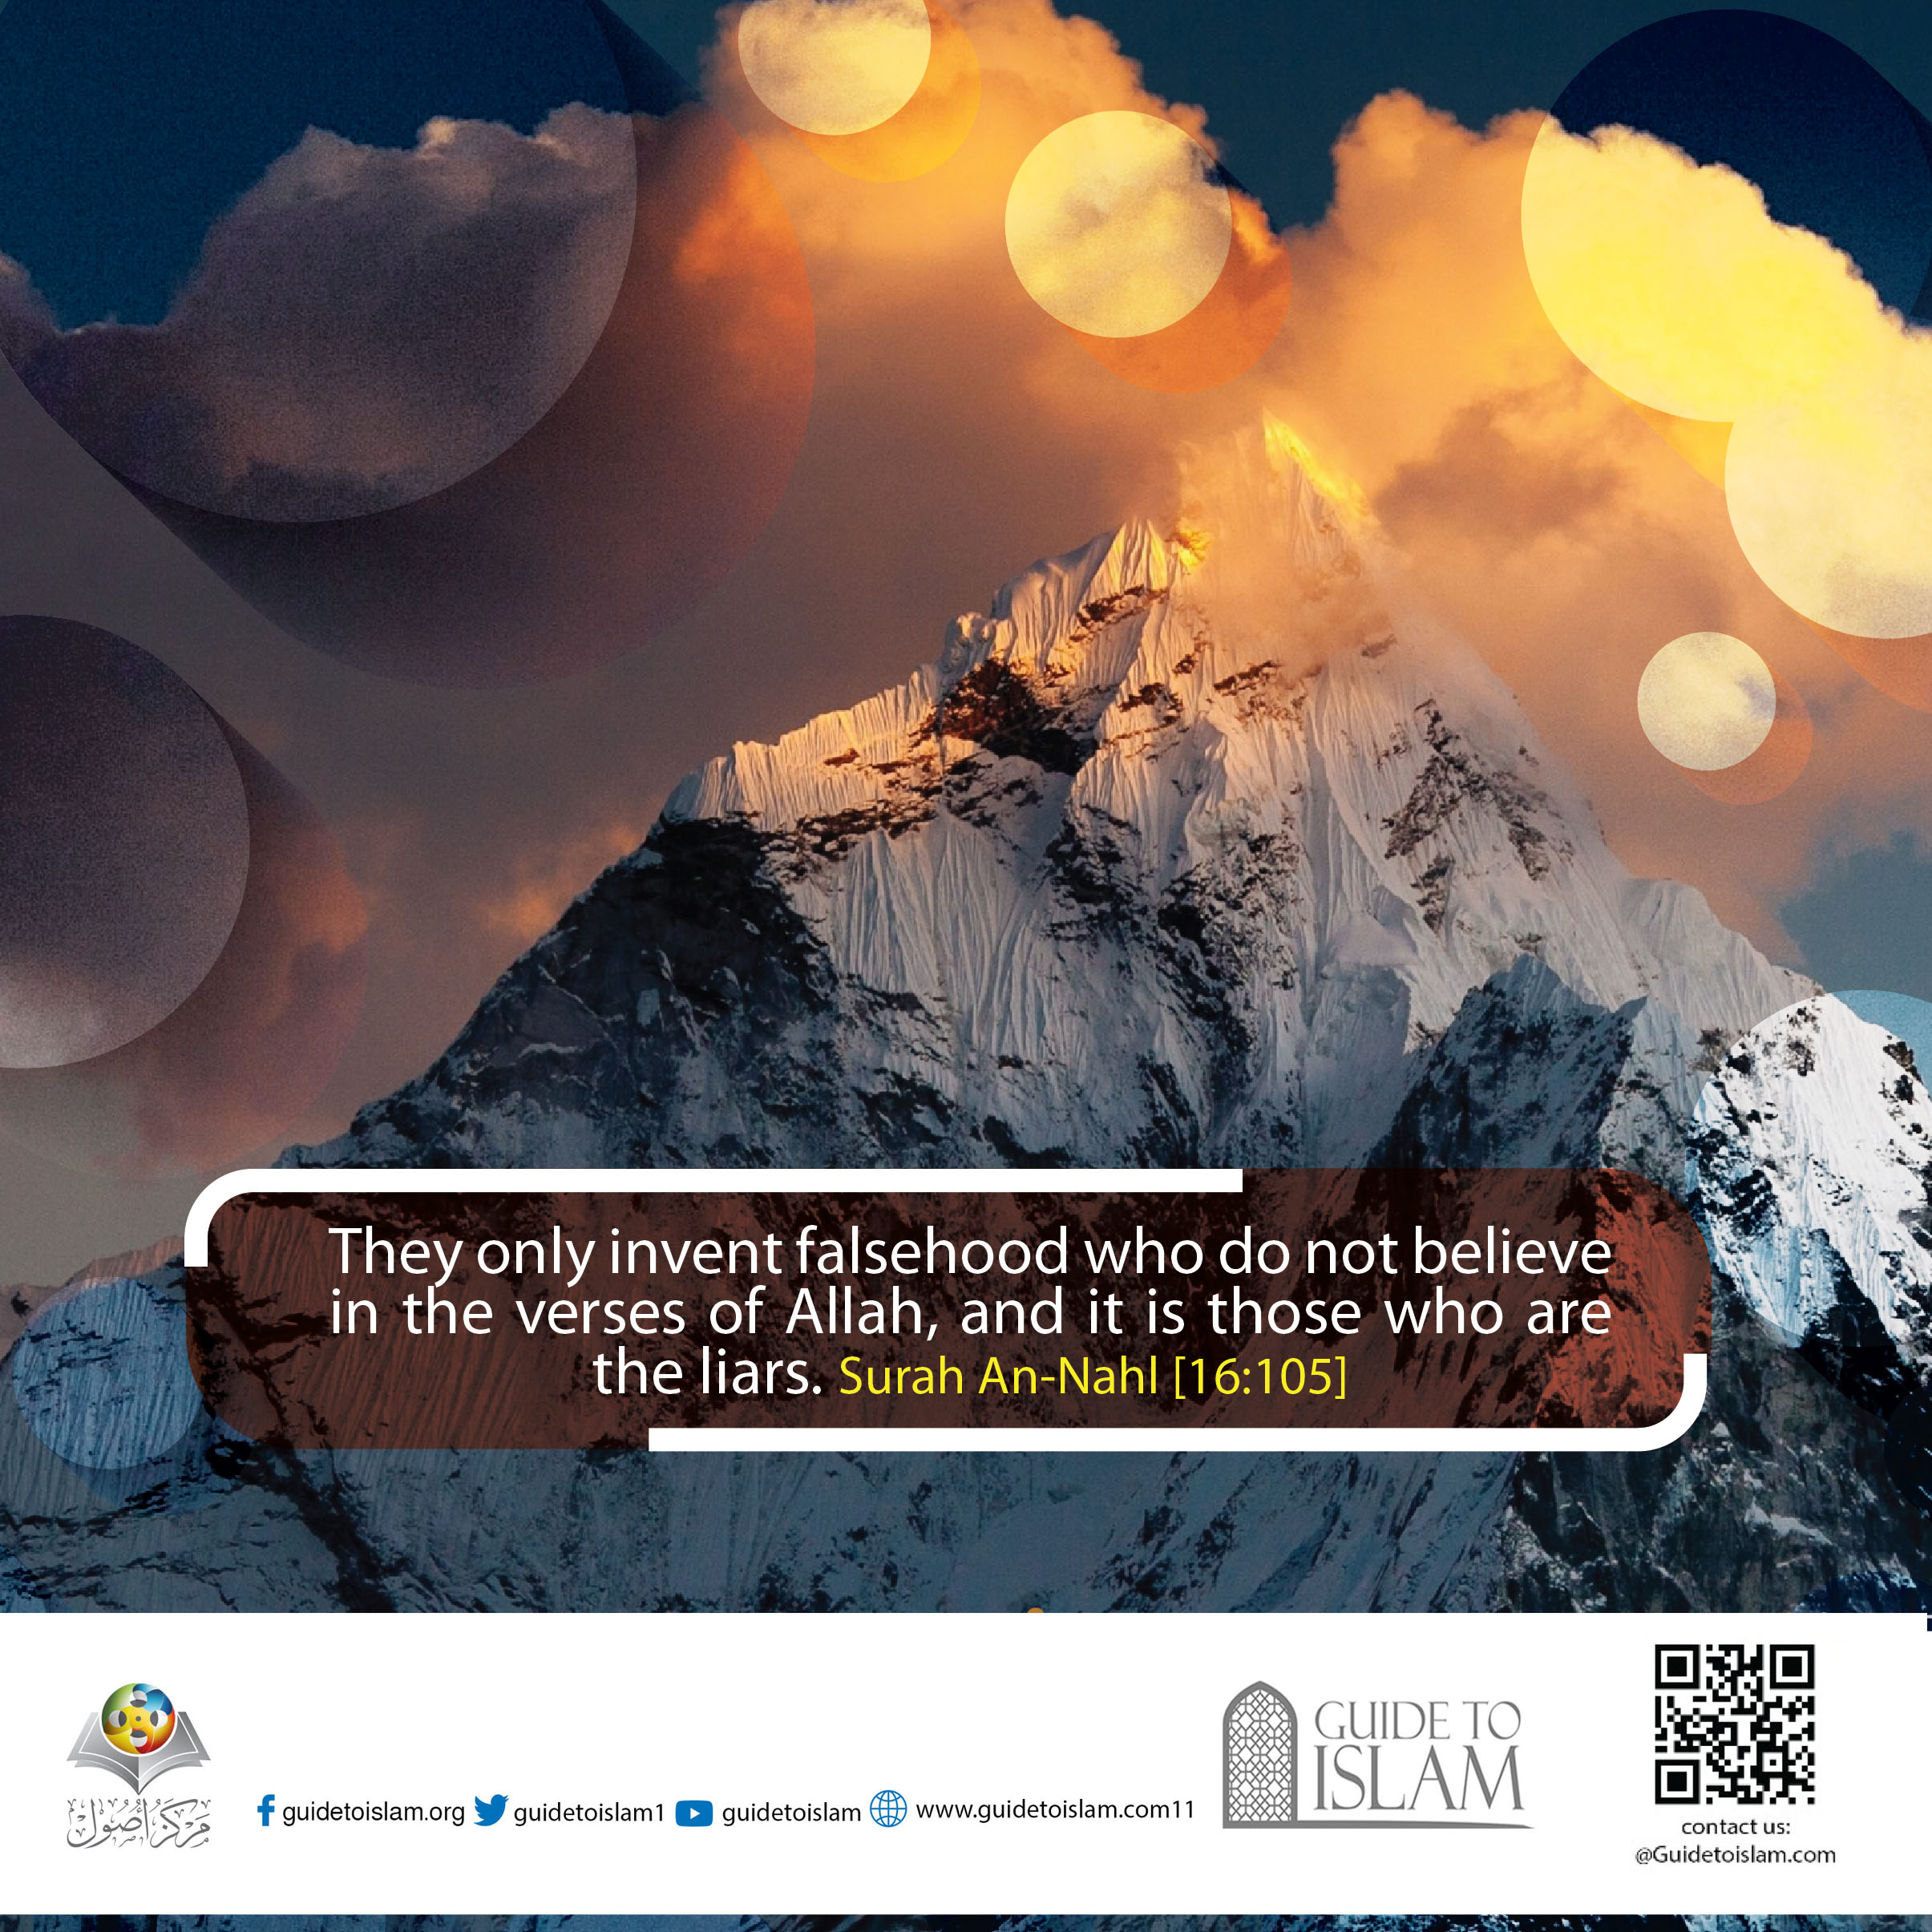 "They only invent falsehood who do not believe in the verses of Allah"